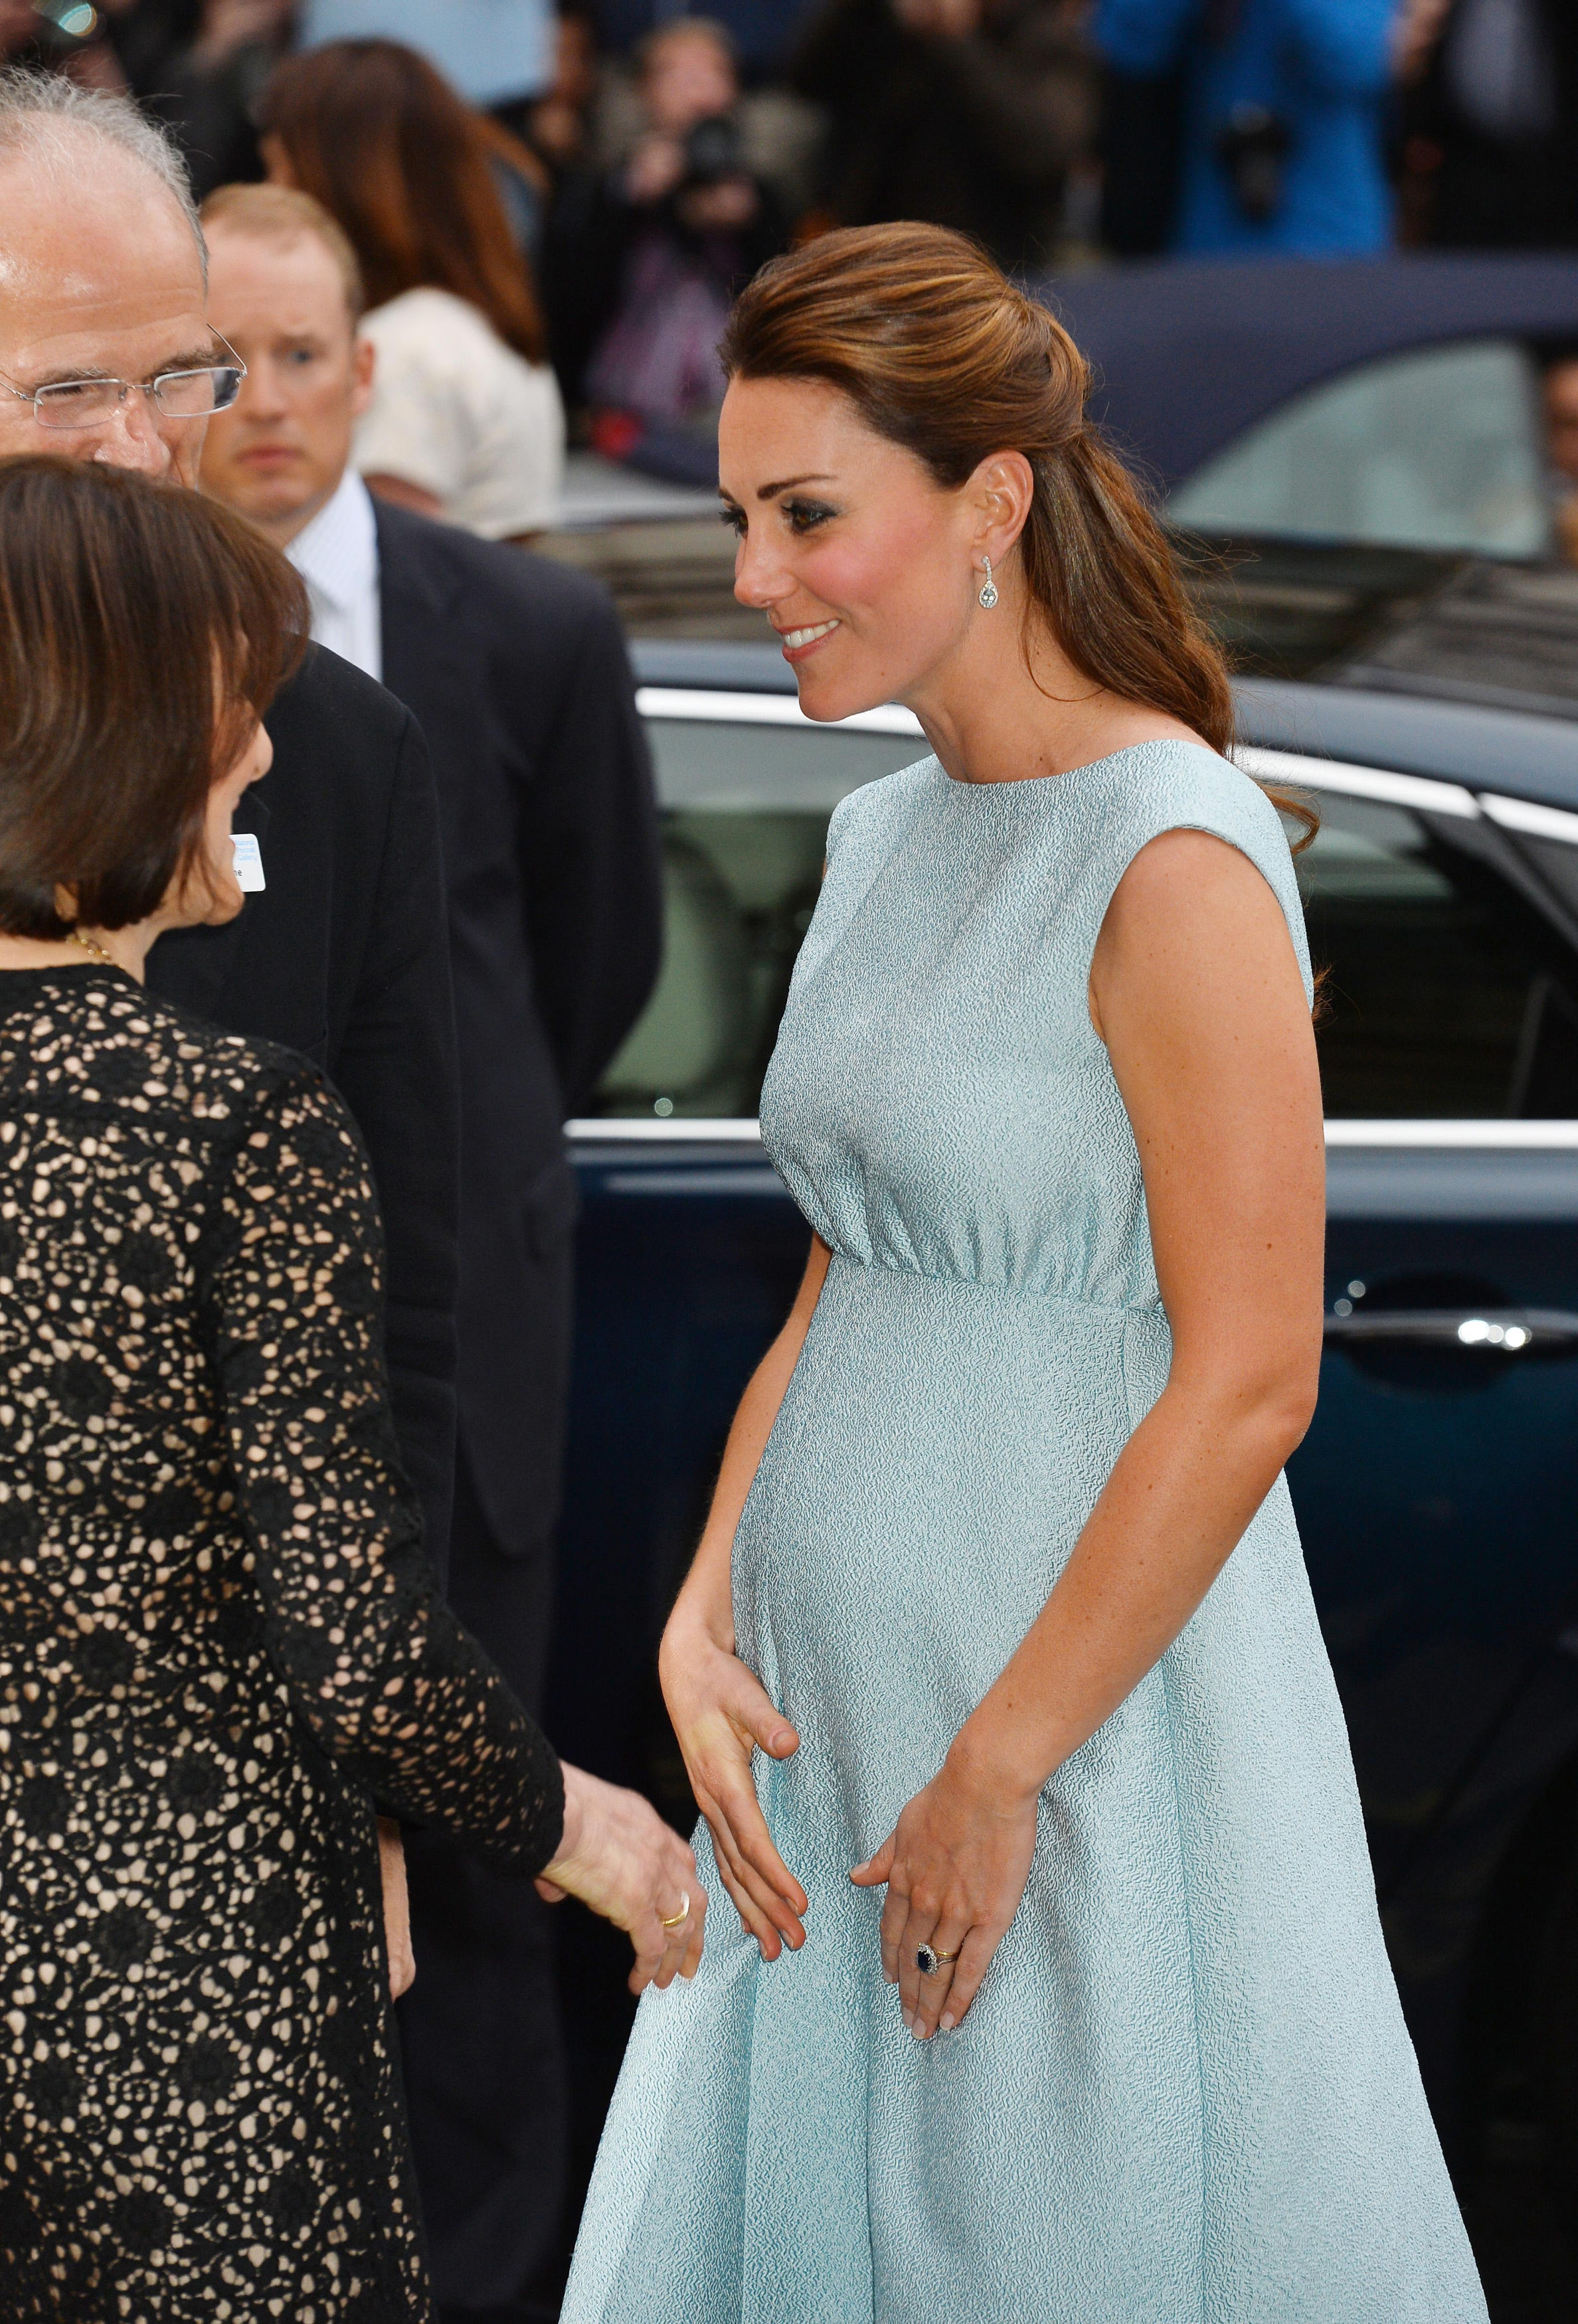 Duchess of Cambridge arriving for a visit the National Portrait Gallery in London to celebrate the work of The Art Room charity on April 24, 2013.